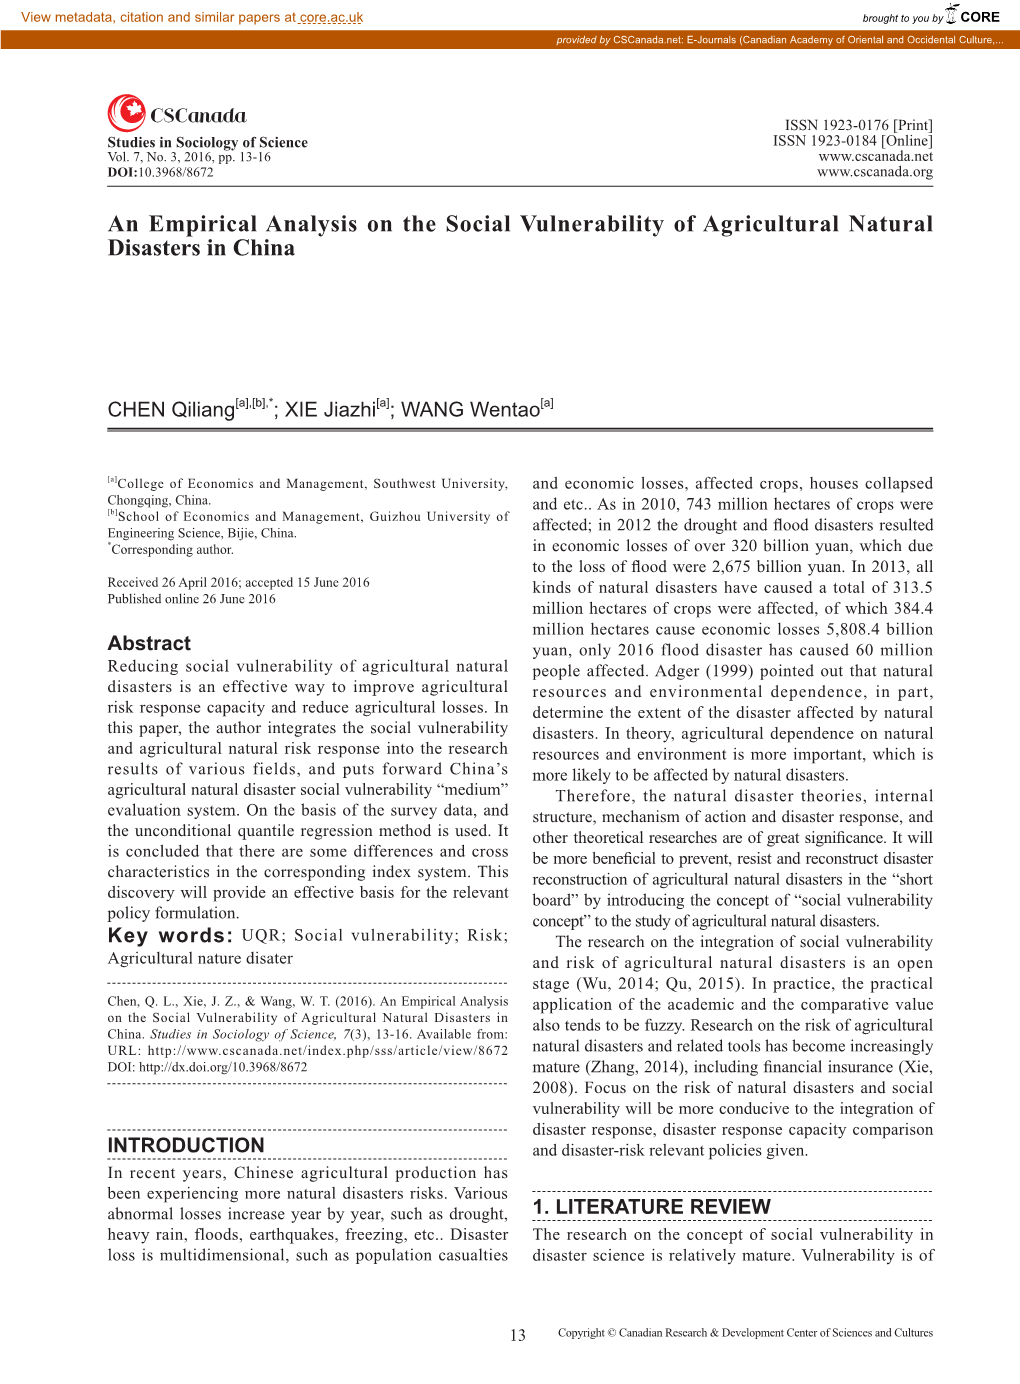 An Empirical Analysis on the Social Vulnerability of Agricultural Natural Disasters in China